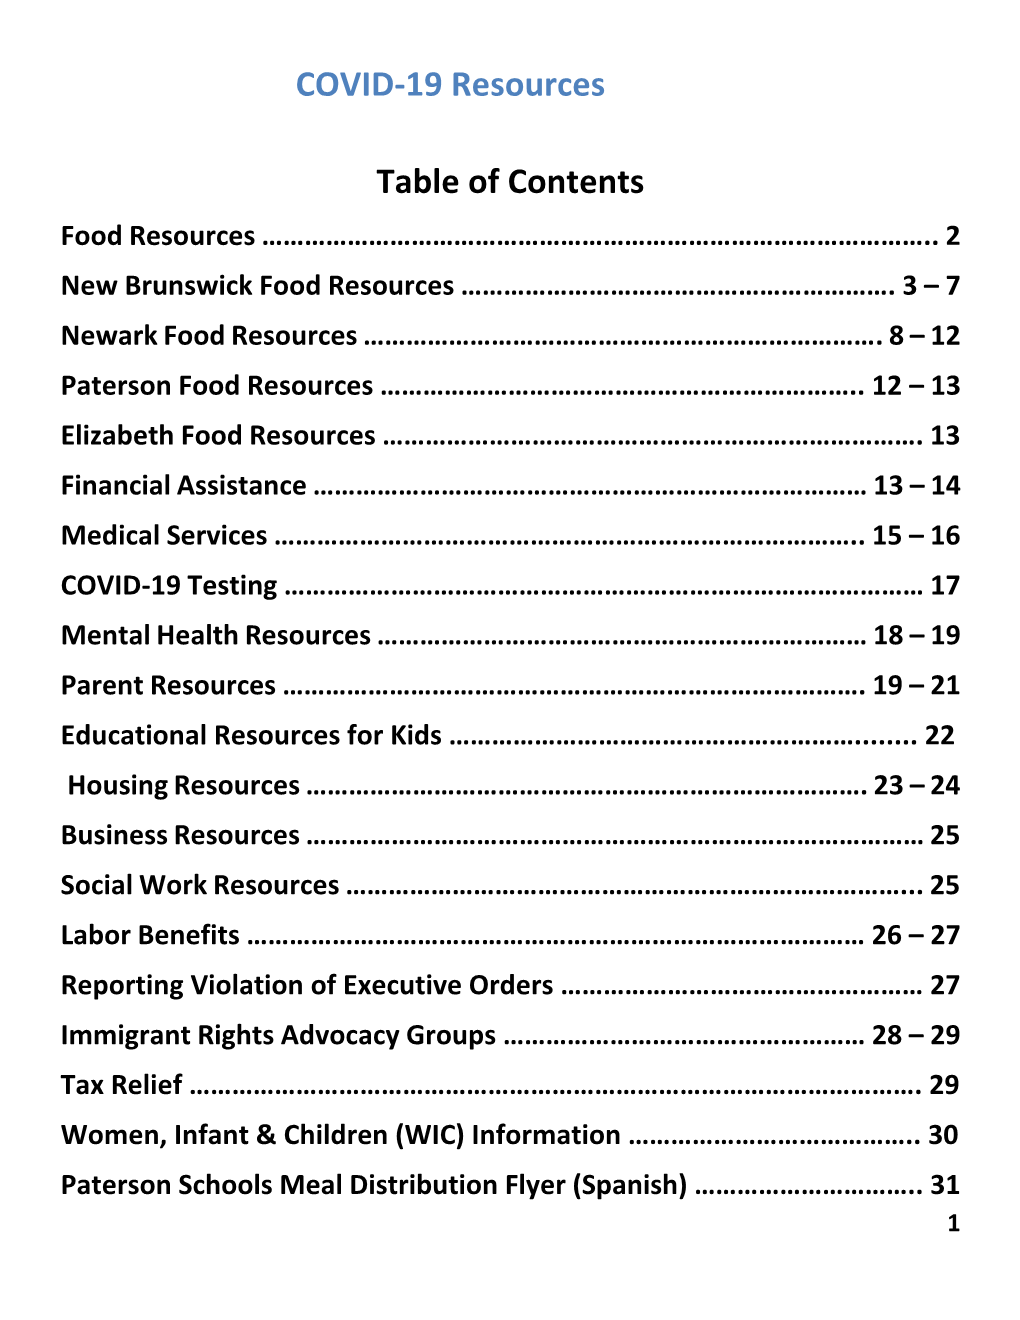 COVID-19 Resources Table of Contents